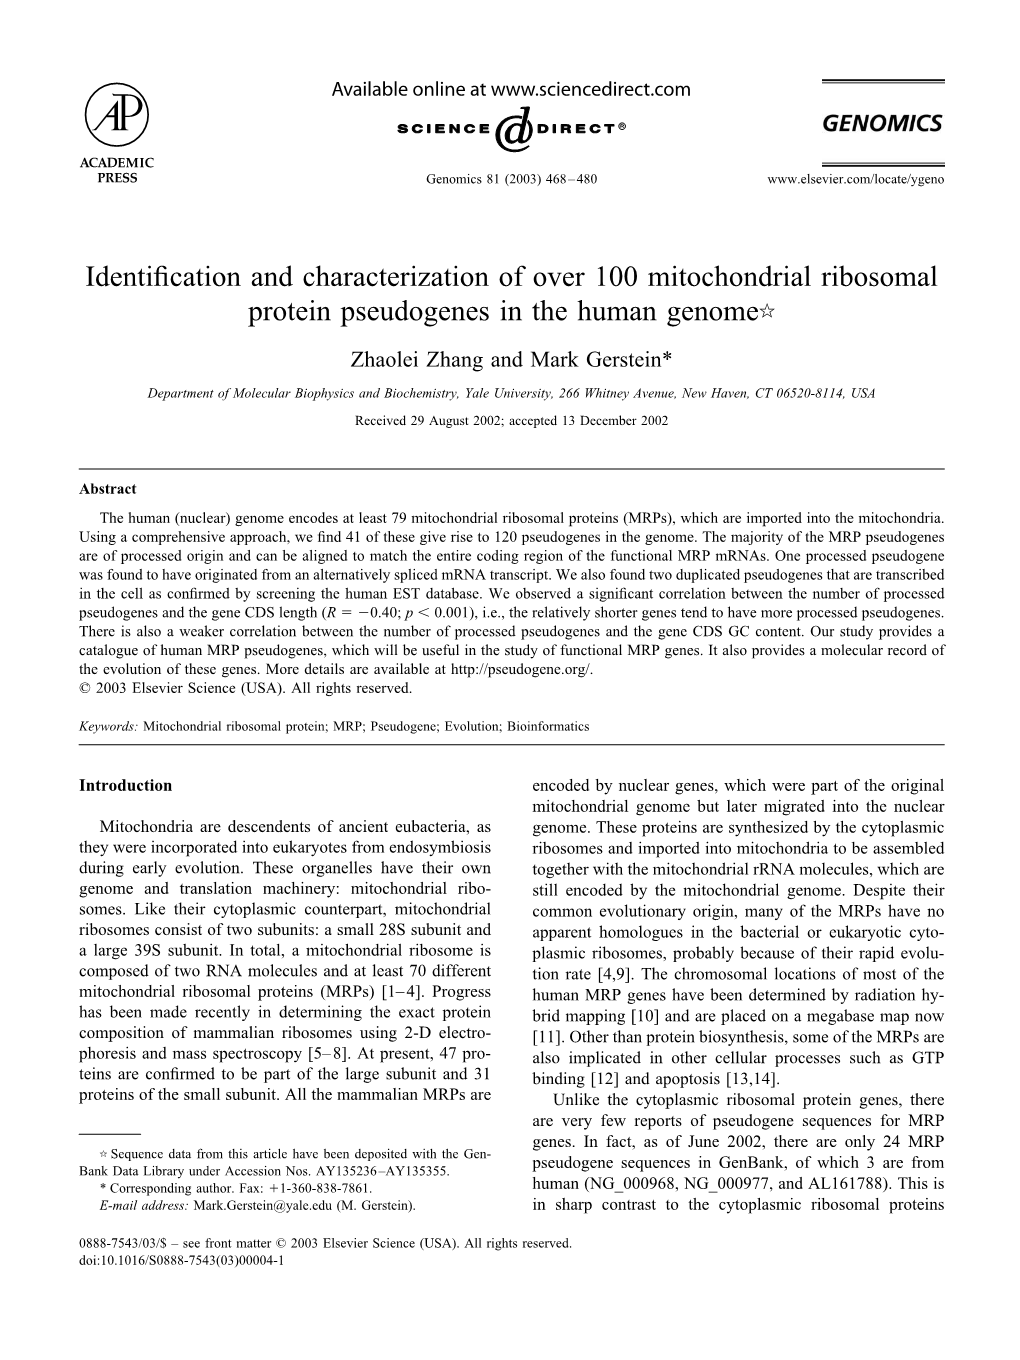 Identification and Characterization of Over 100 Mitochondrial Ribosomal